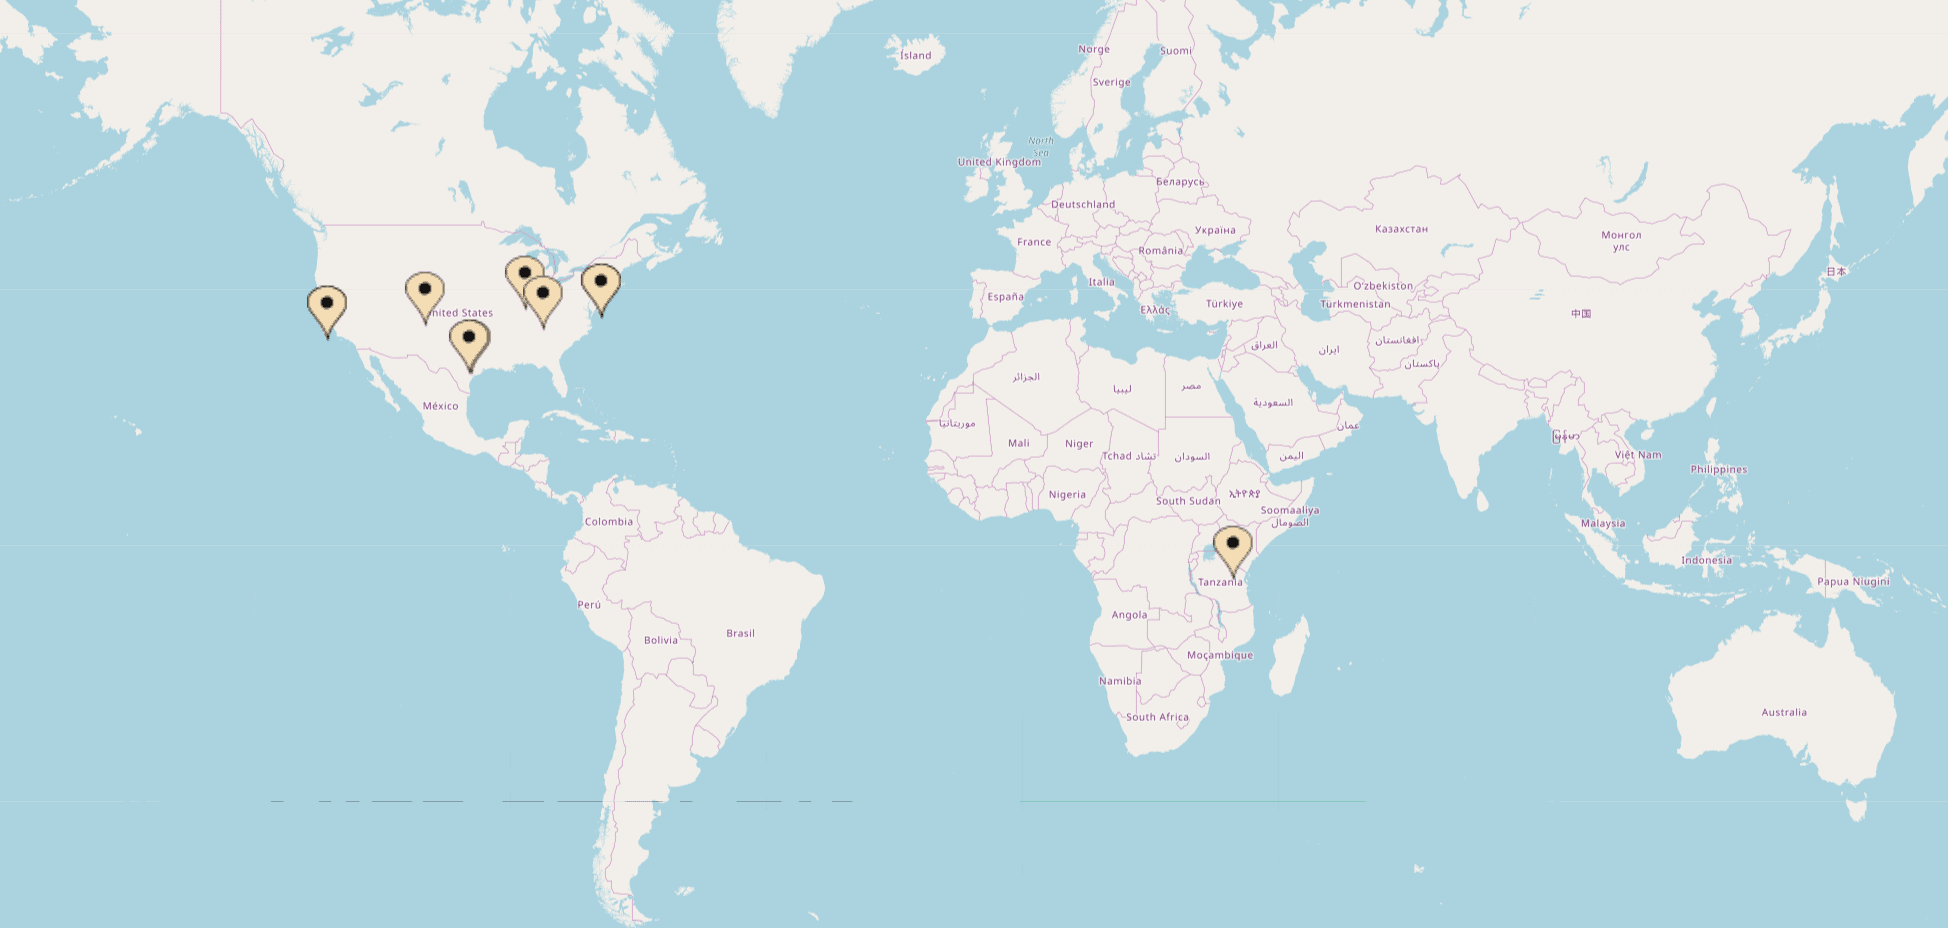 Map of the world with points for every city with CauseLabs' clients.